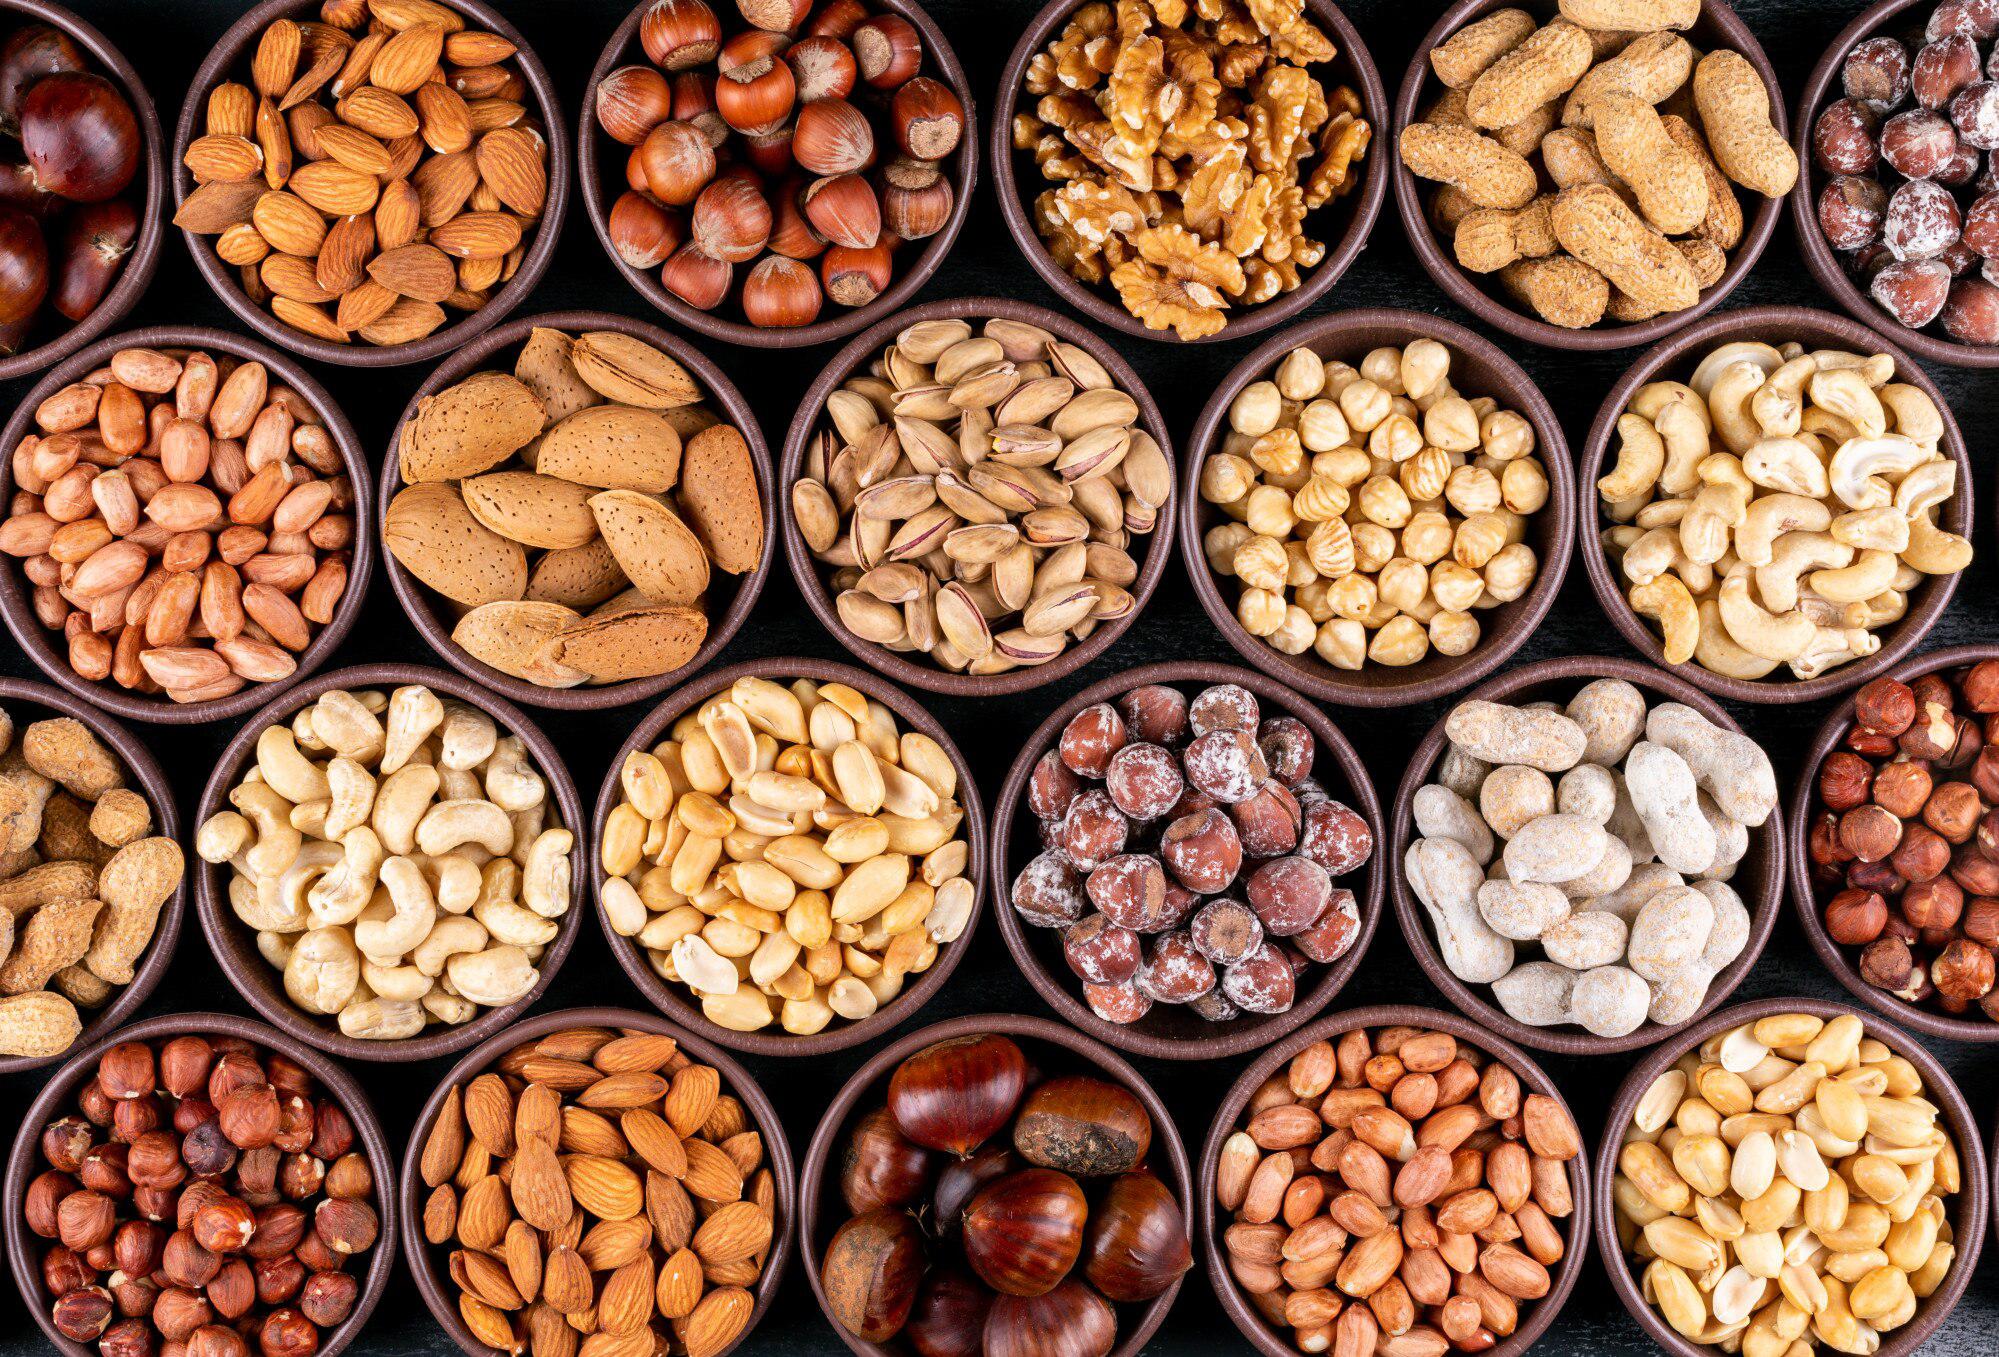 Nuts can also be an excellent source of zinc.